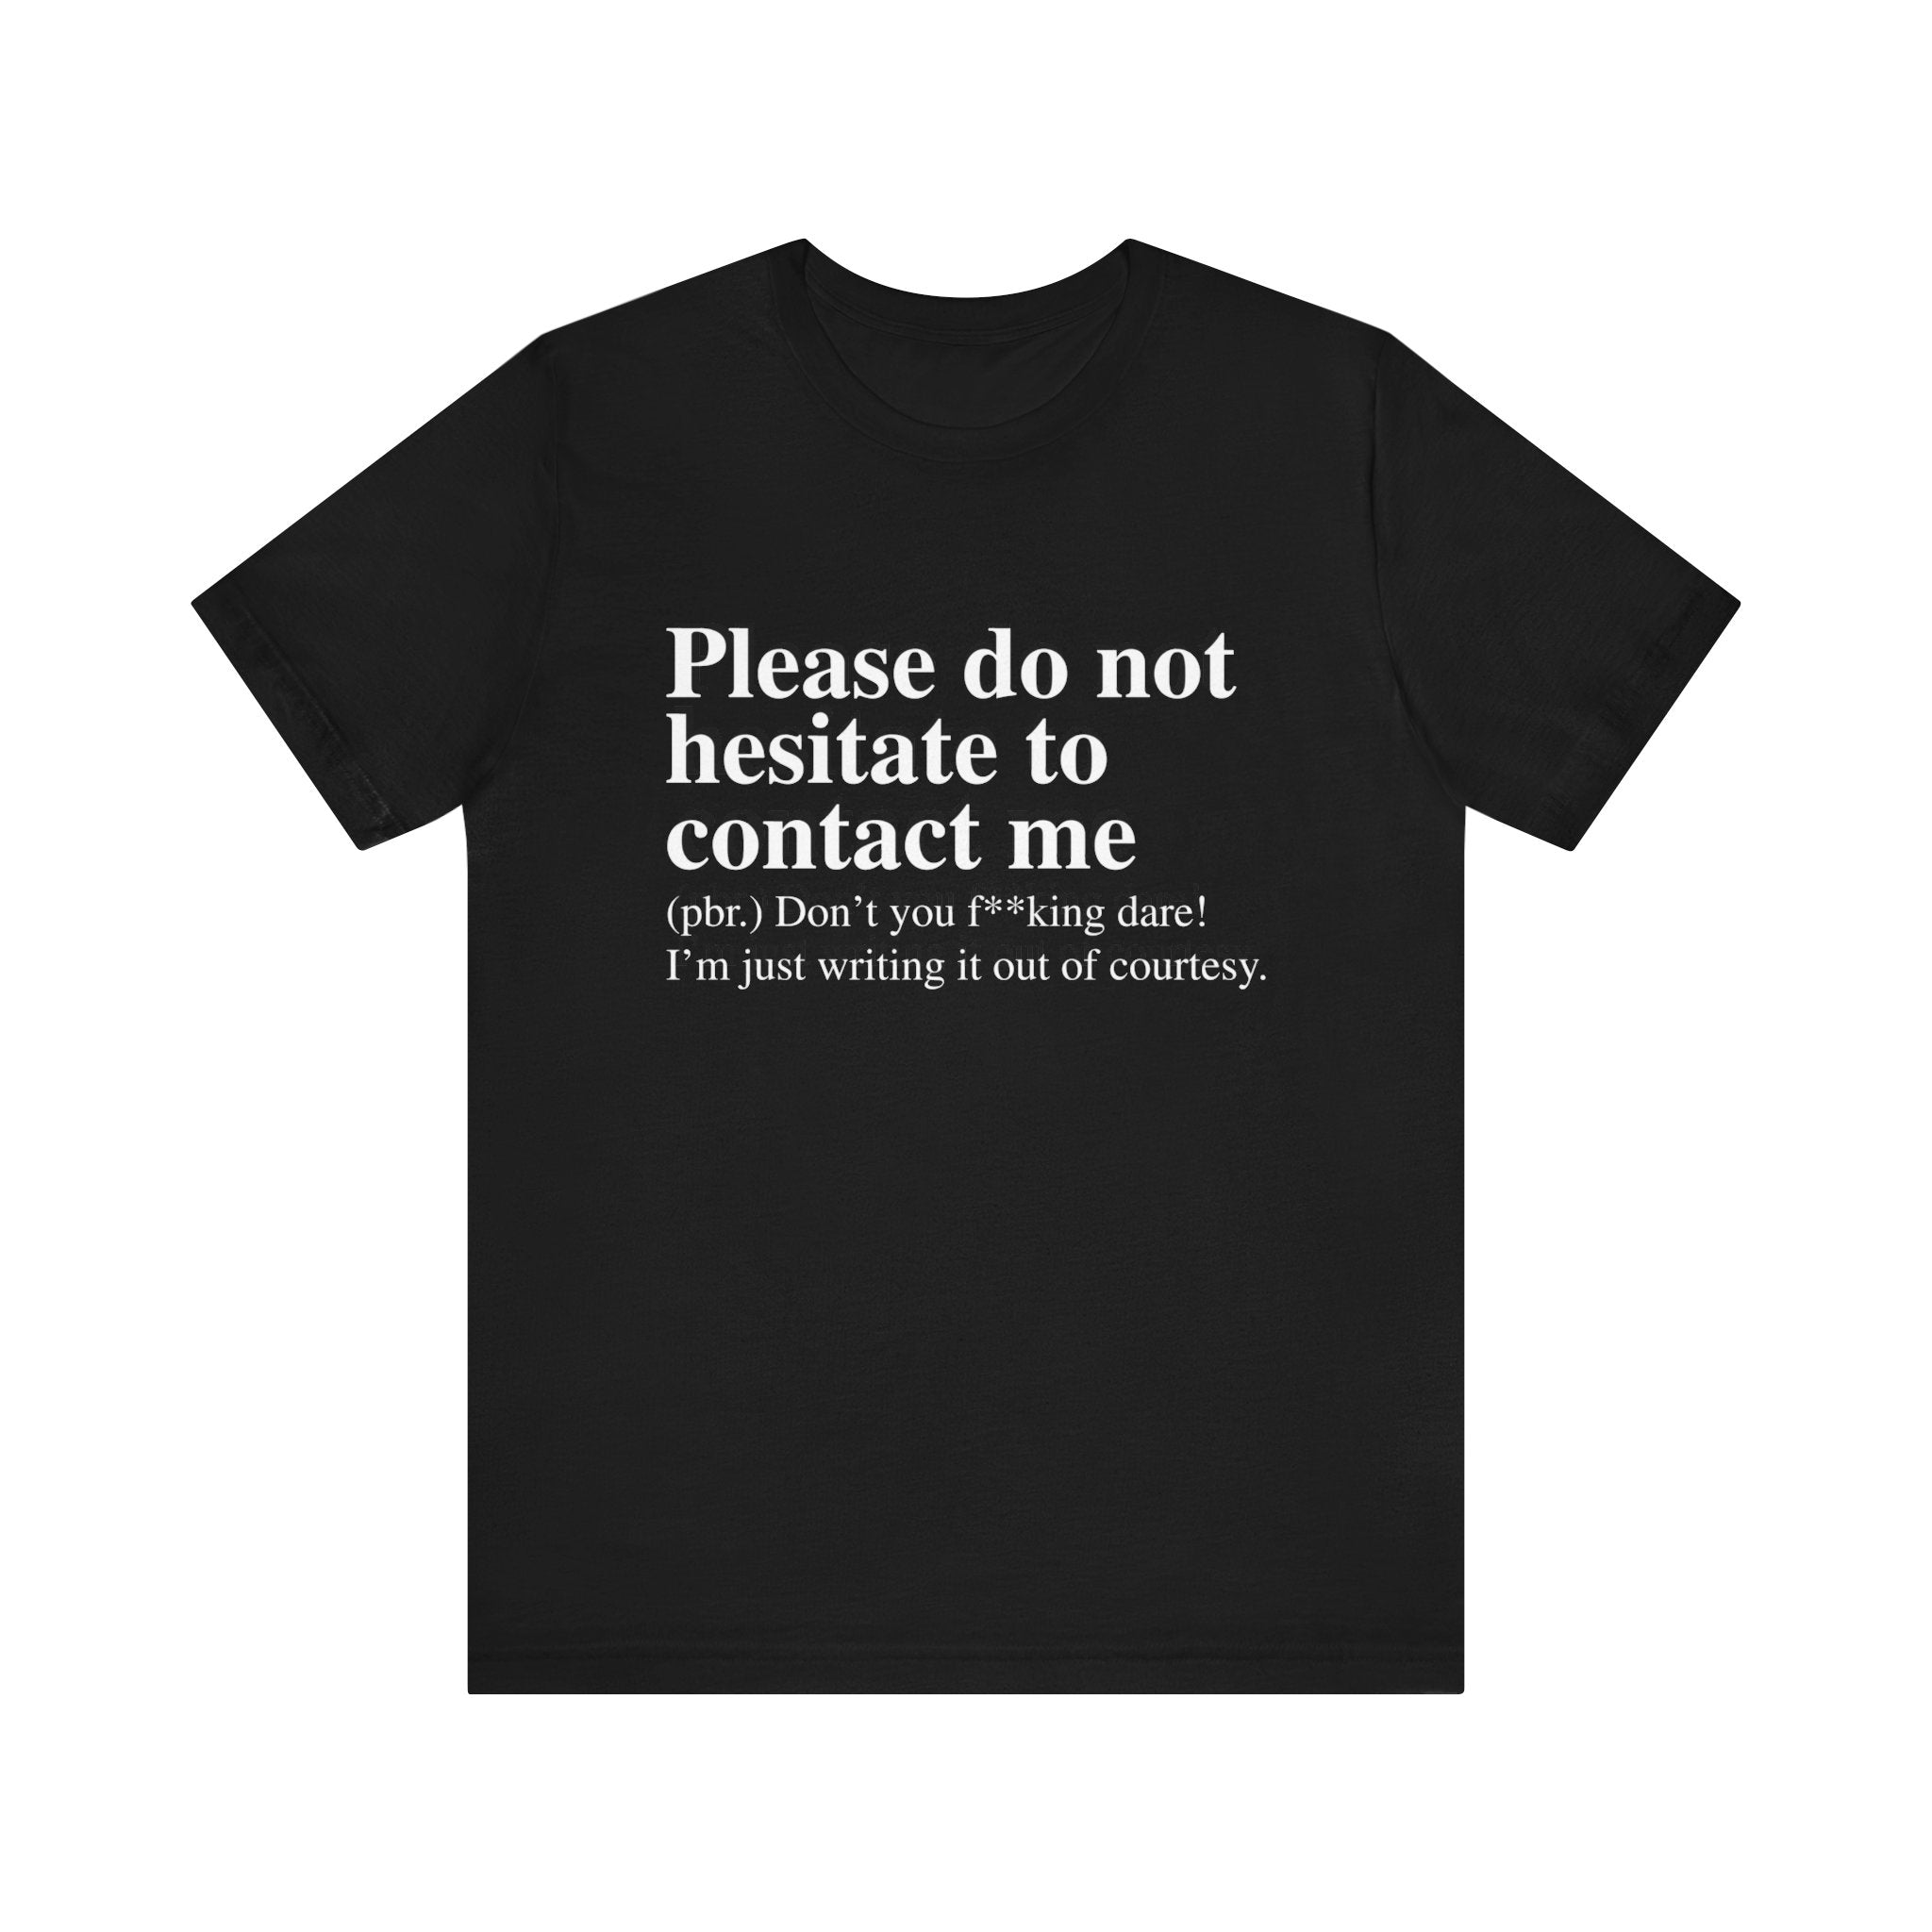 Black unisex jersey tee with text that reads: "Craft, don't you fking dare! I'm just writing it out of courtesy." Craft